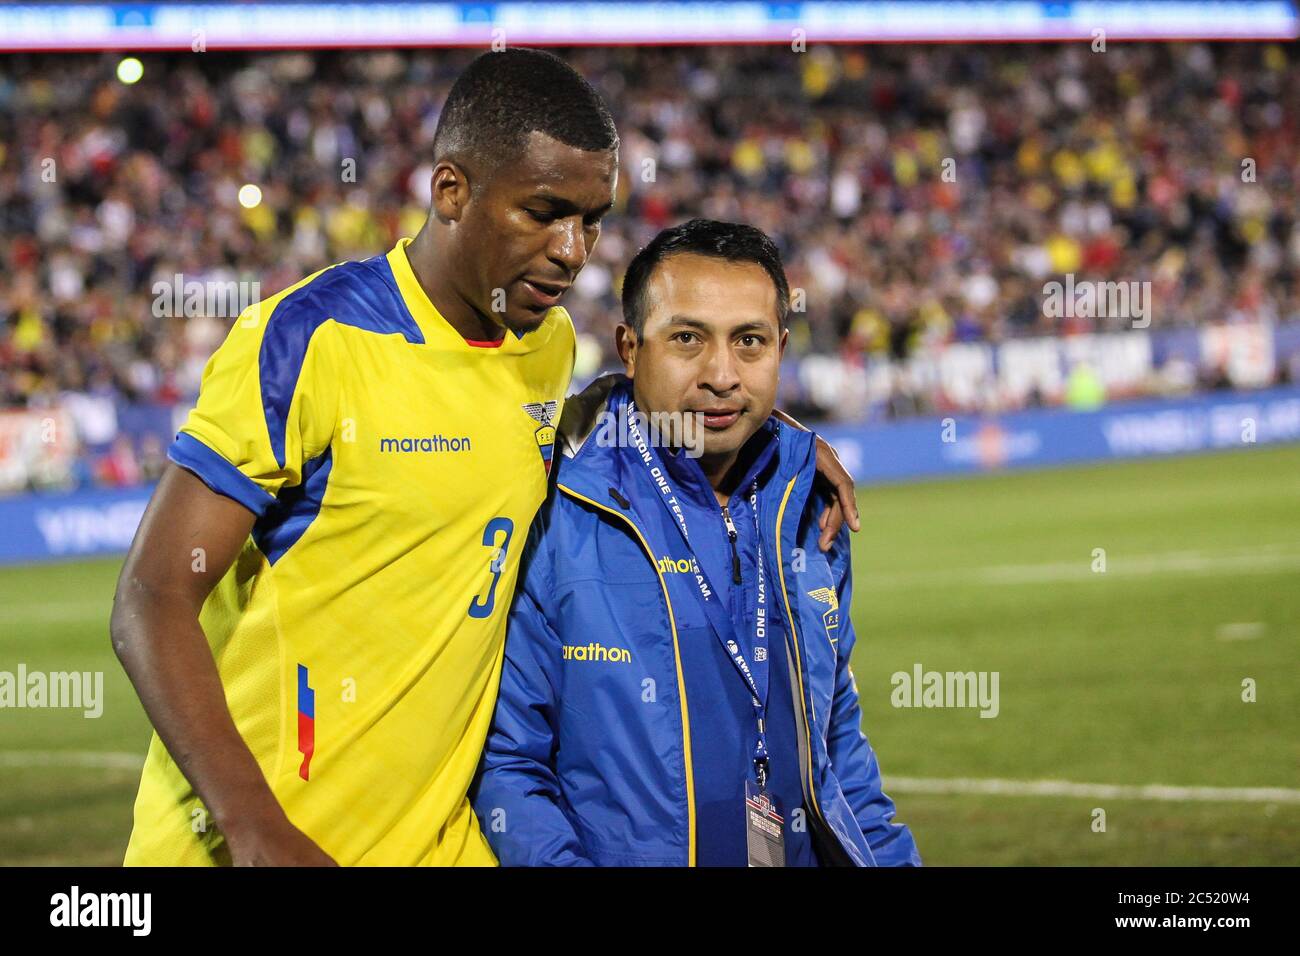 EAST HARTFORD, CT - OCTOBER 10:  Player #3 from Ecuadorian soccer team is leavin field against the United States during an international friendly at R Stock Photo